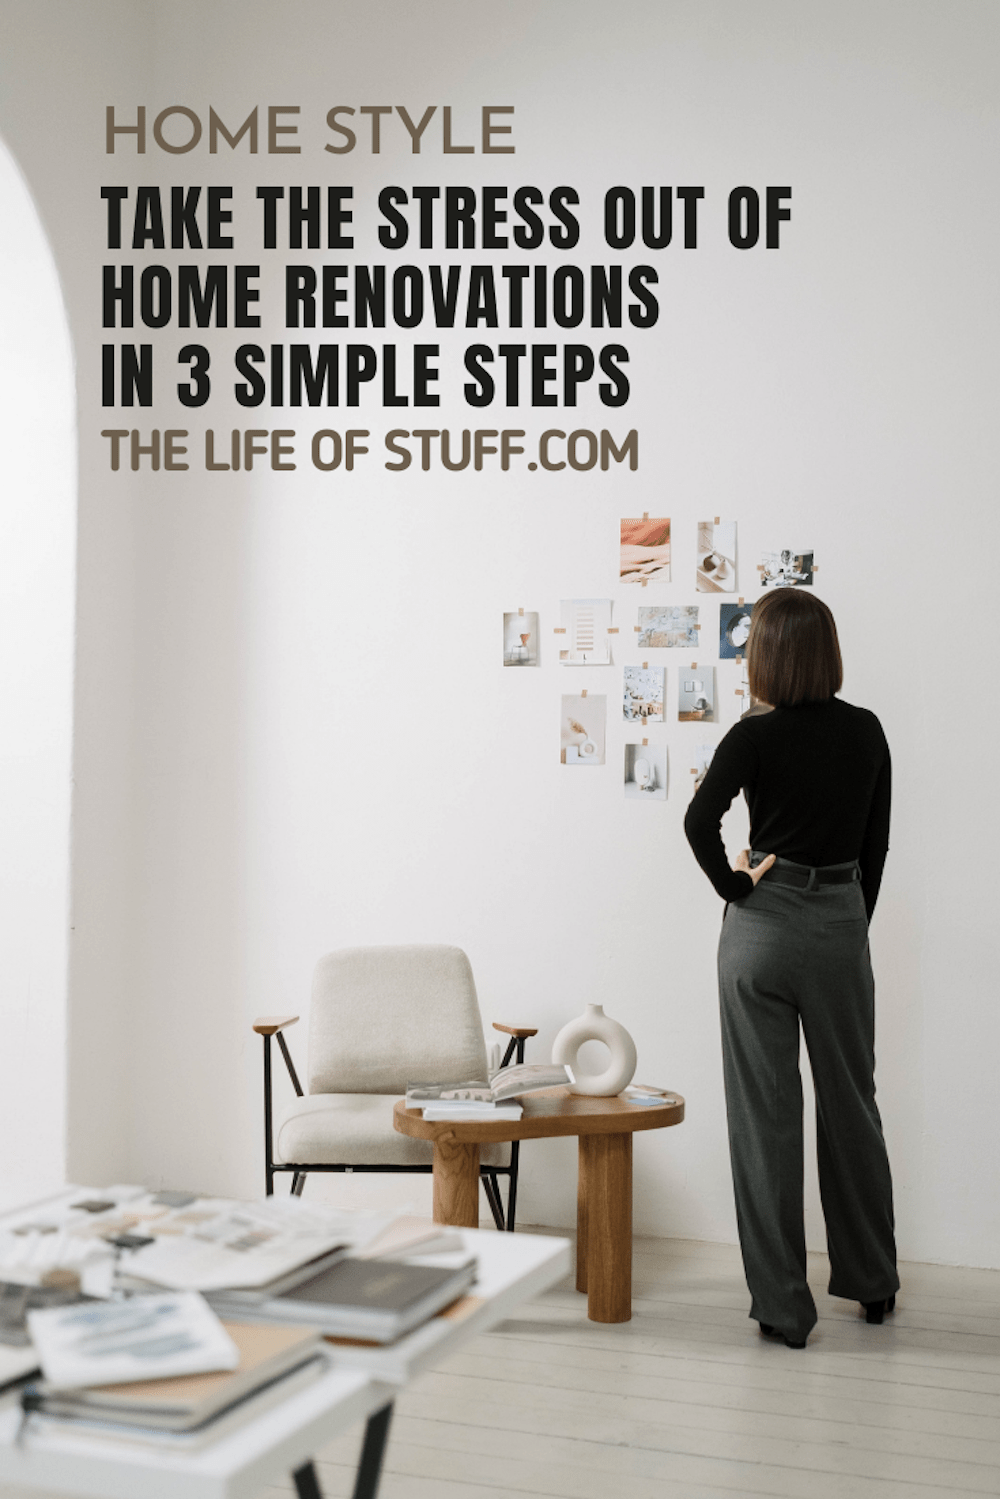 Take The Stress Out Of Home Renovations in 3 Simple Steps - The Life of Stuff